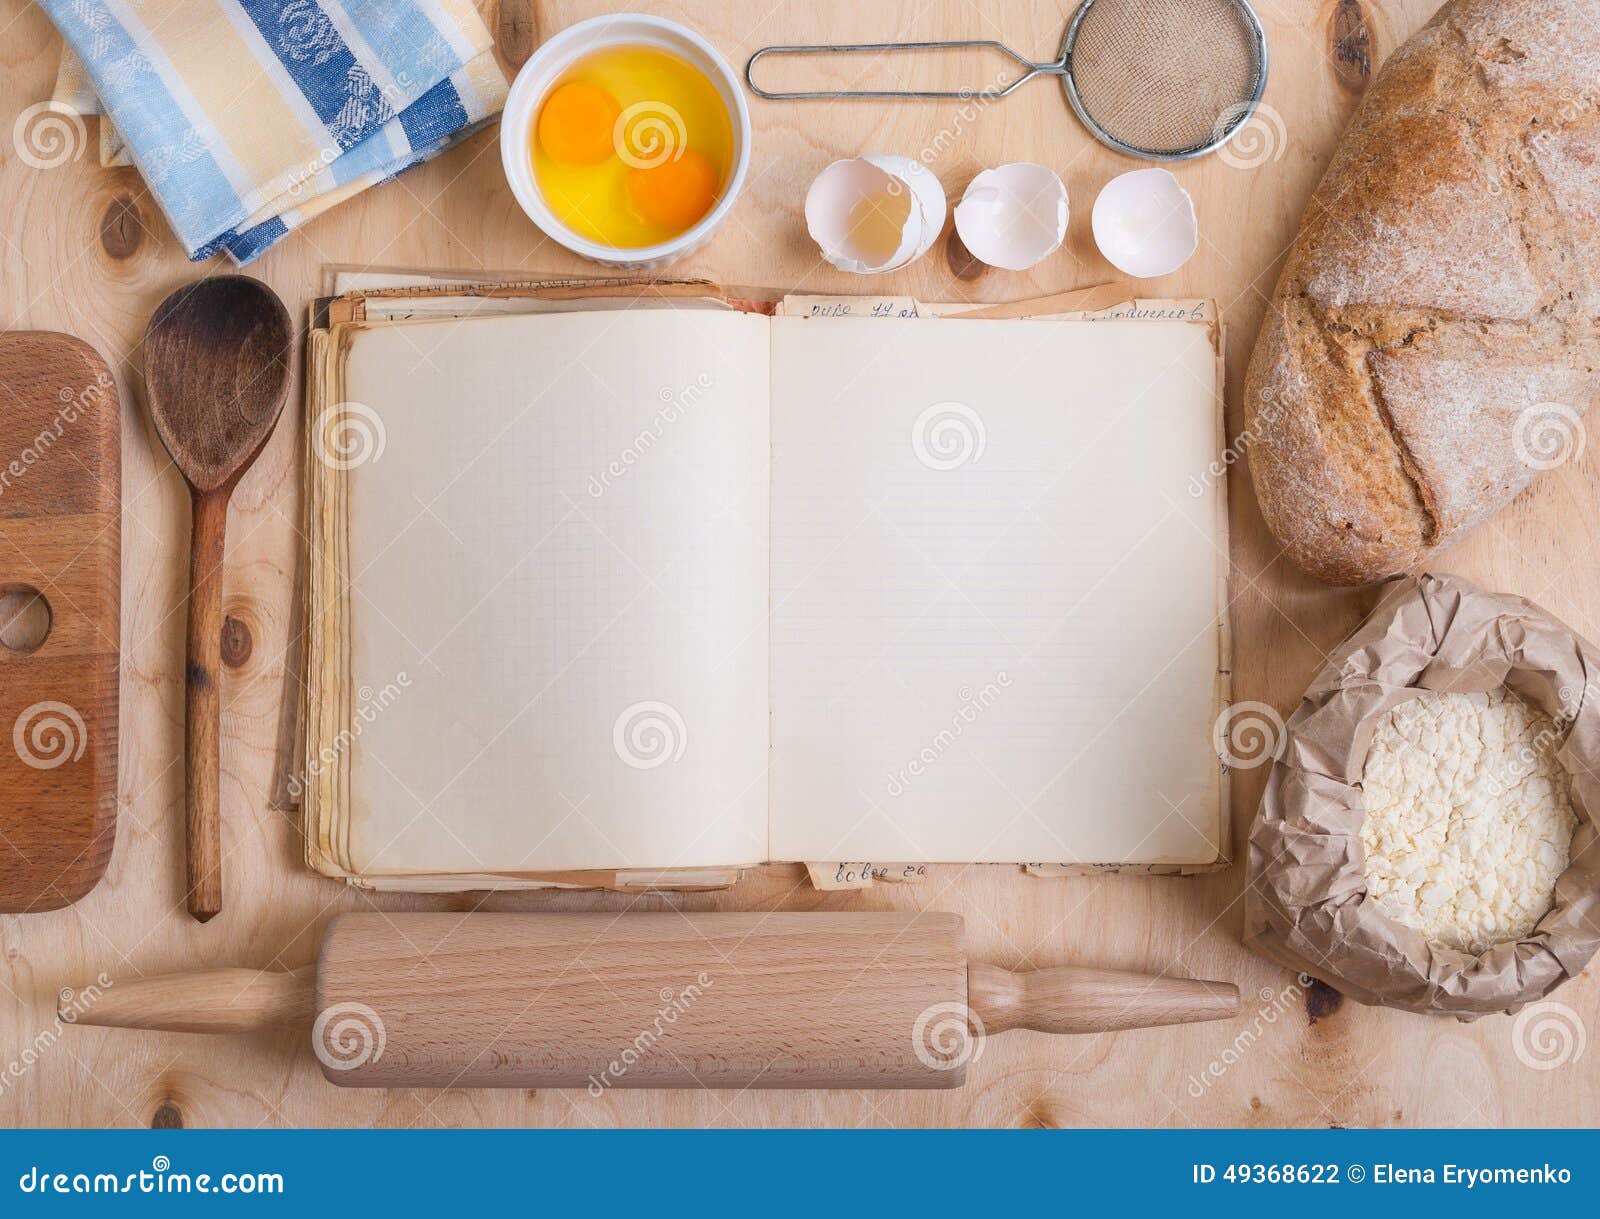 Baking Background With Blank Cook Book, Eggshell, Flour ...